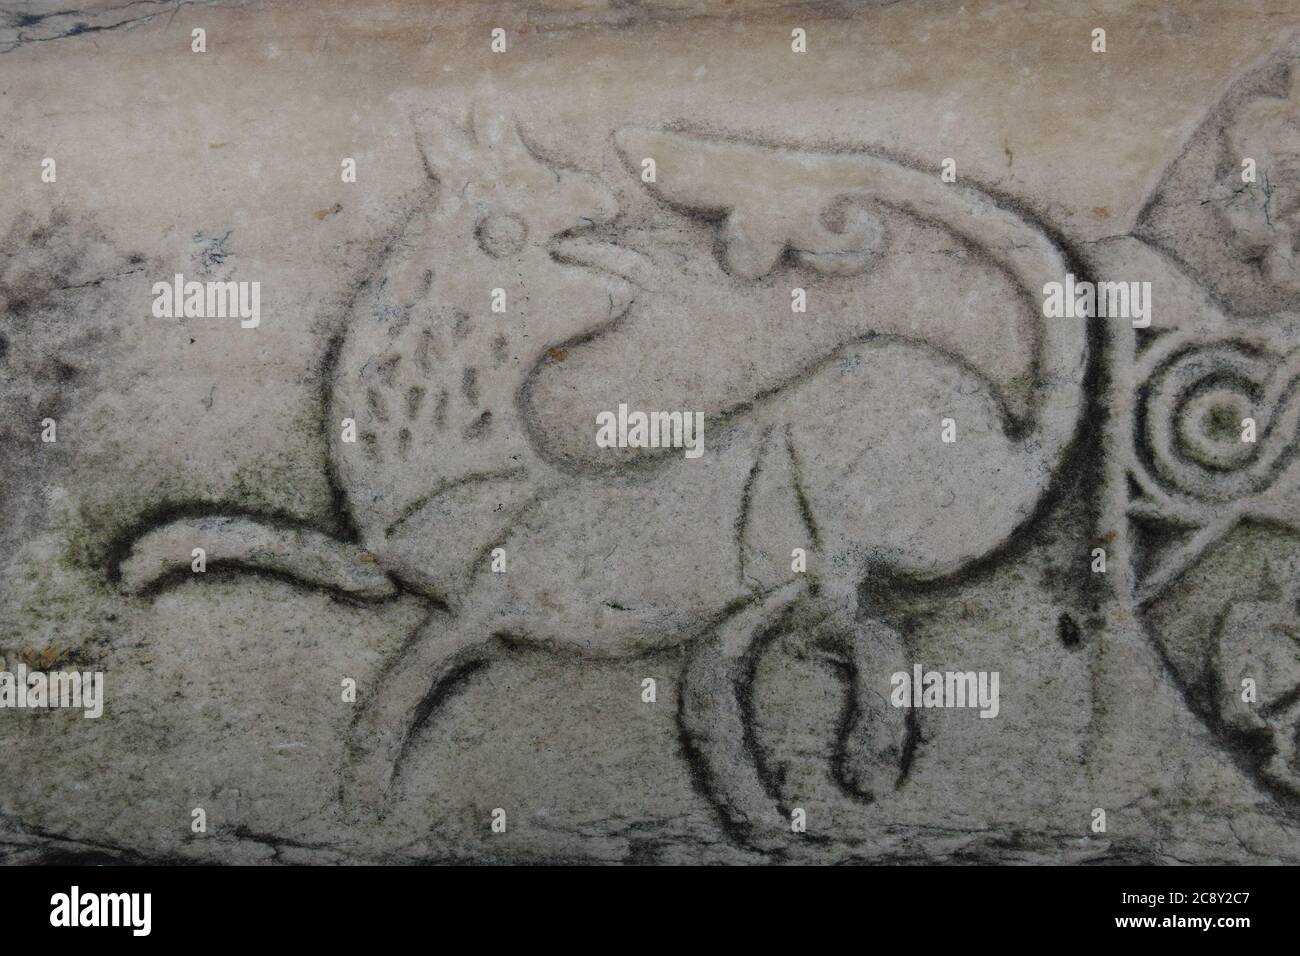 Stone carving of tail chasing dog or mythological creature on ancient agora marble column. Stock Photo